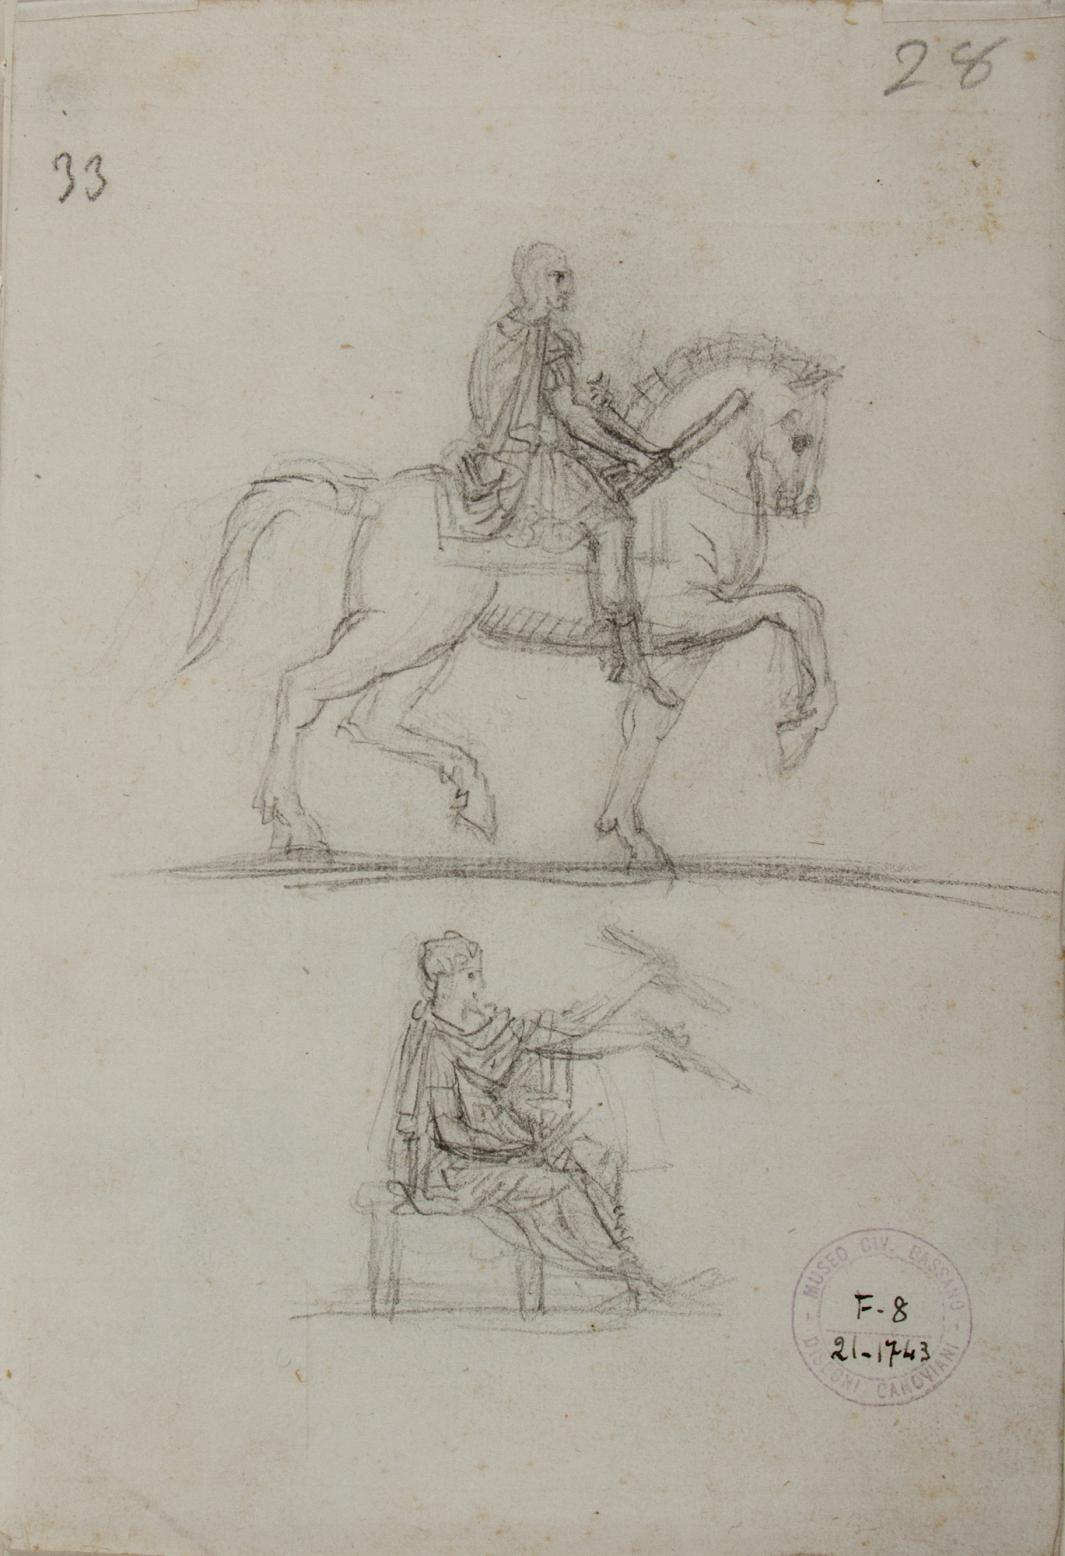 graphite sketches of man on horse and man seated